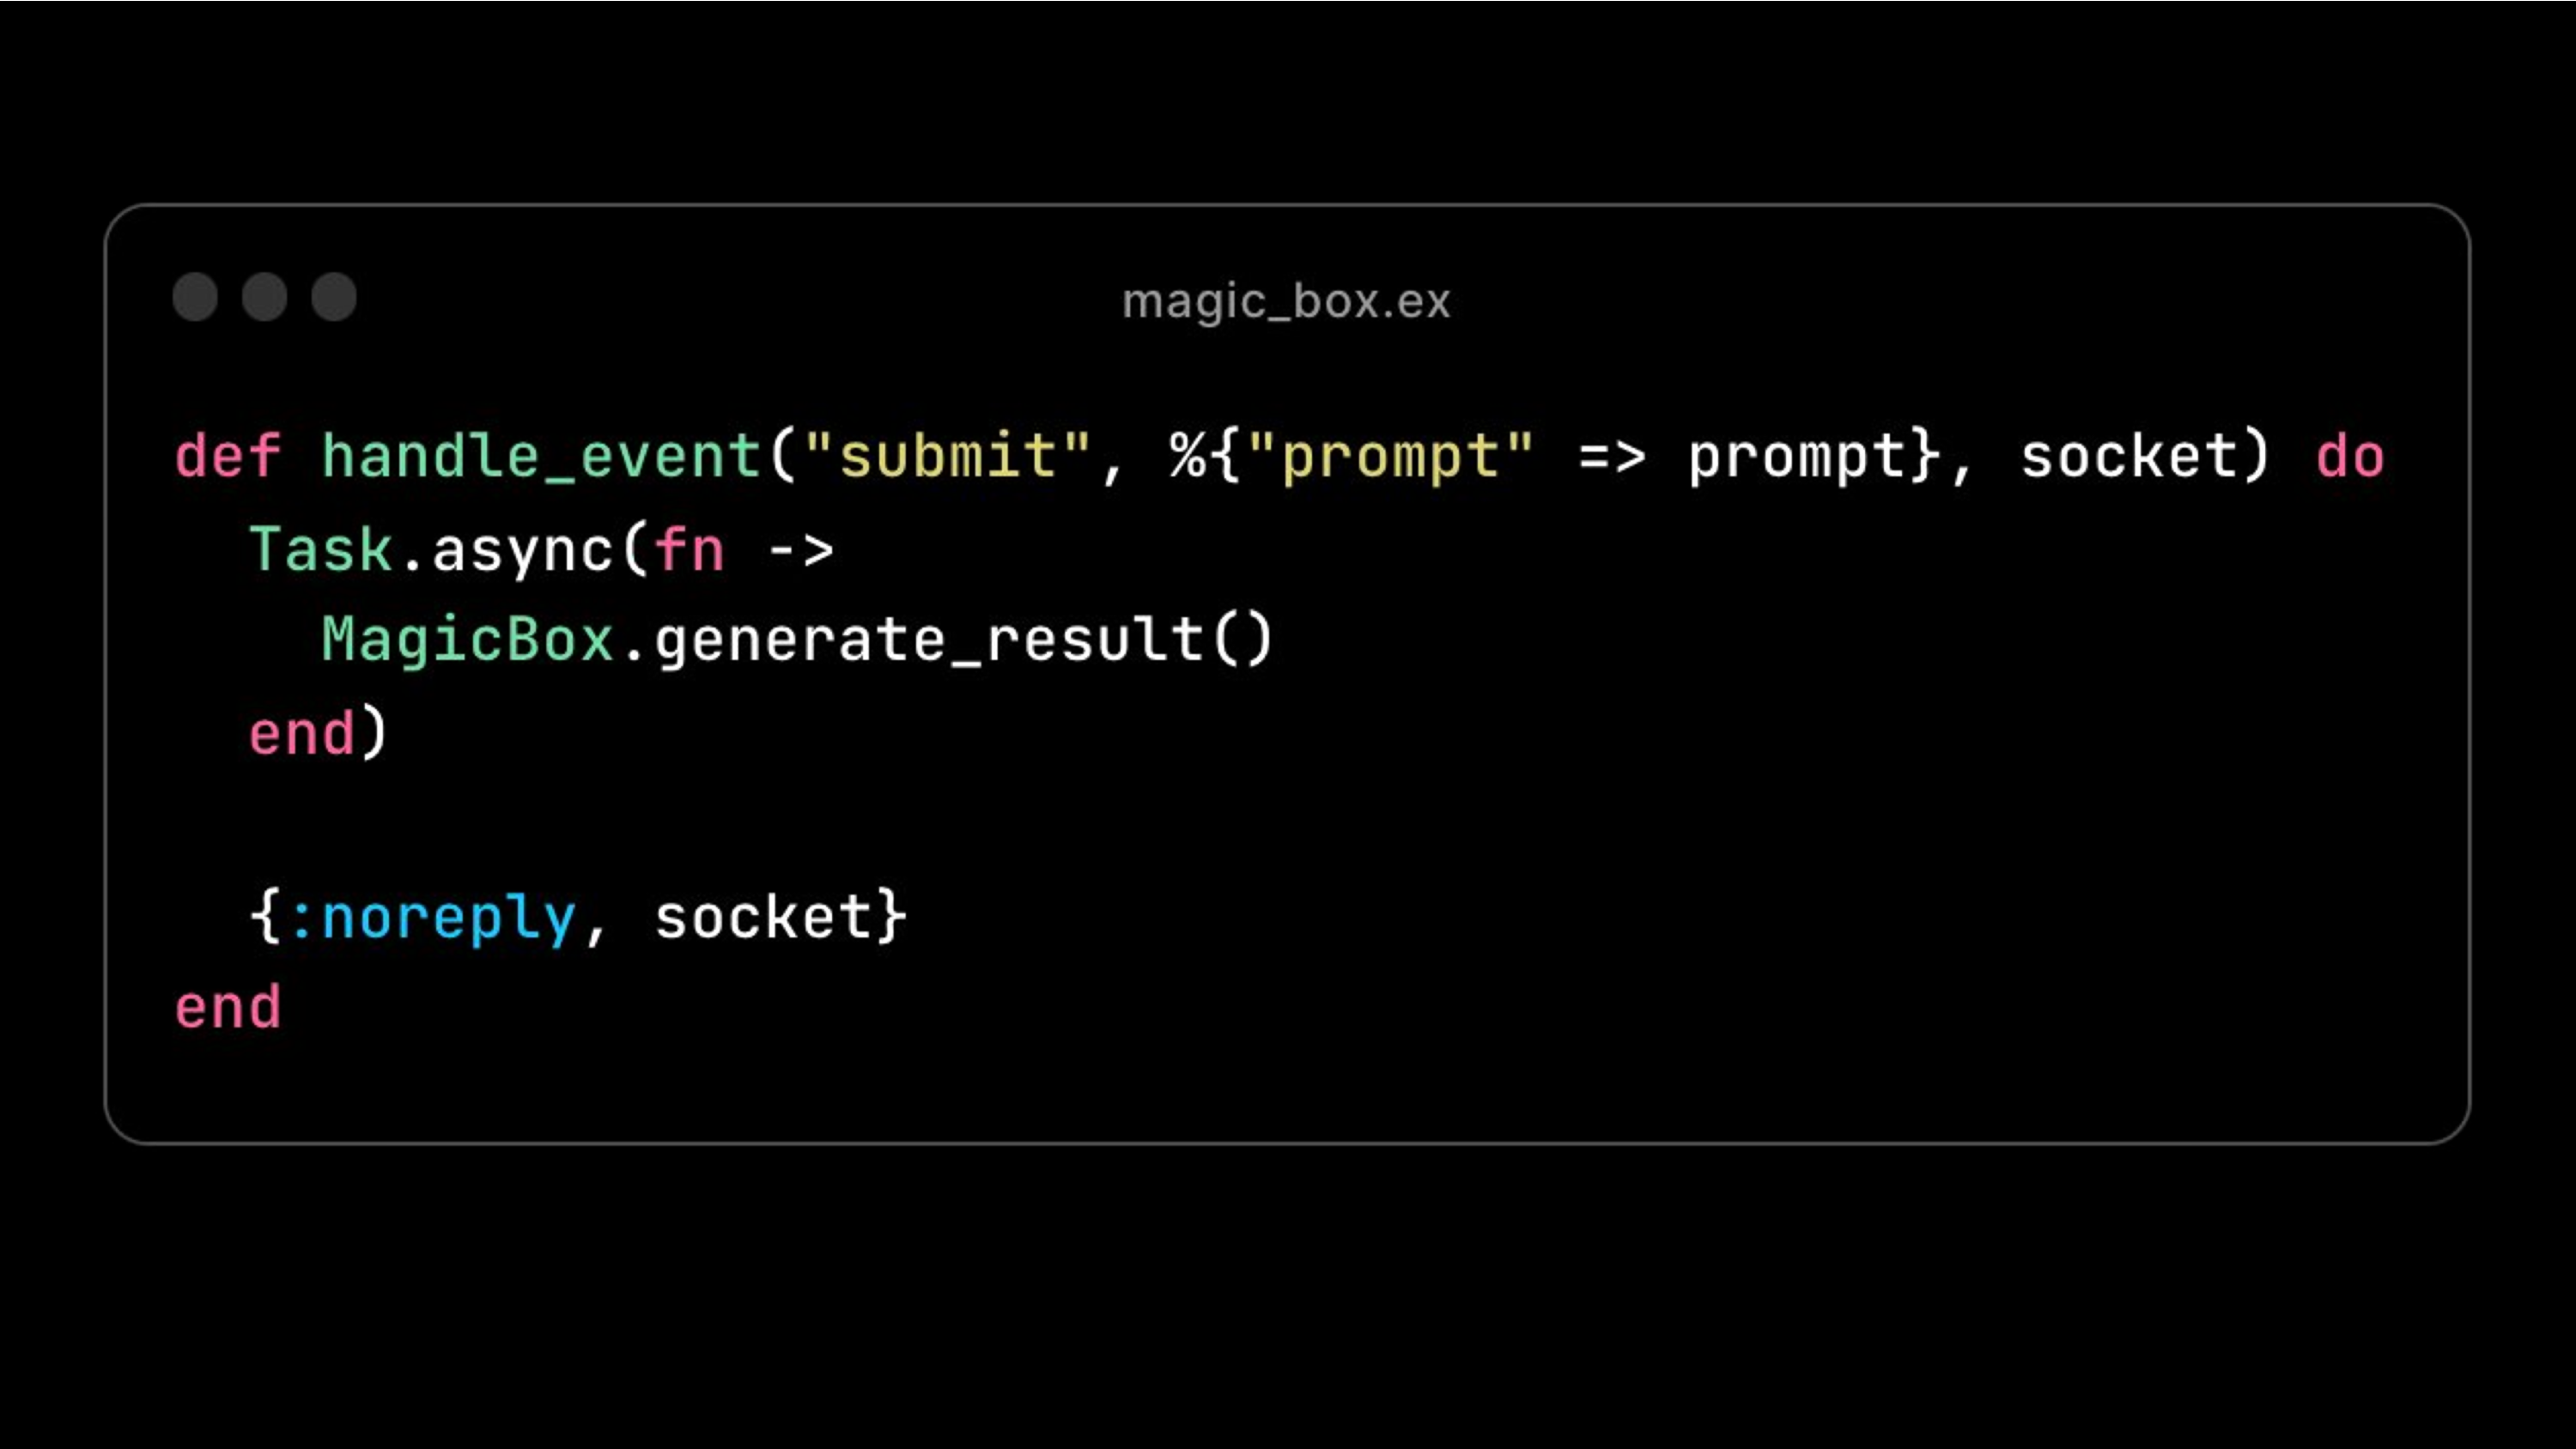 LI
def handle_event("submit", %{"prompt" => prompt}, socket) do
Task.async(fn ->
MagicBox.generate_result()
end)
{:noreply, socket}
LU
